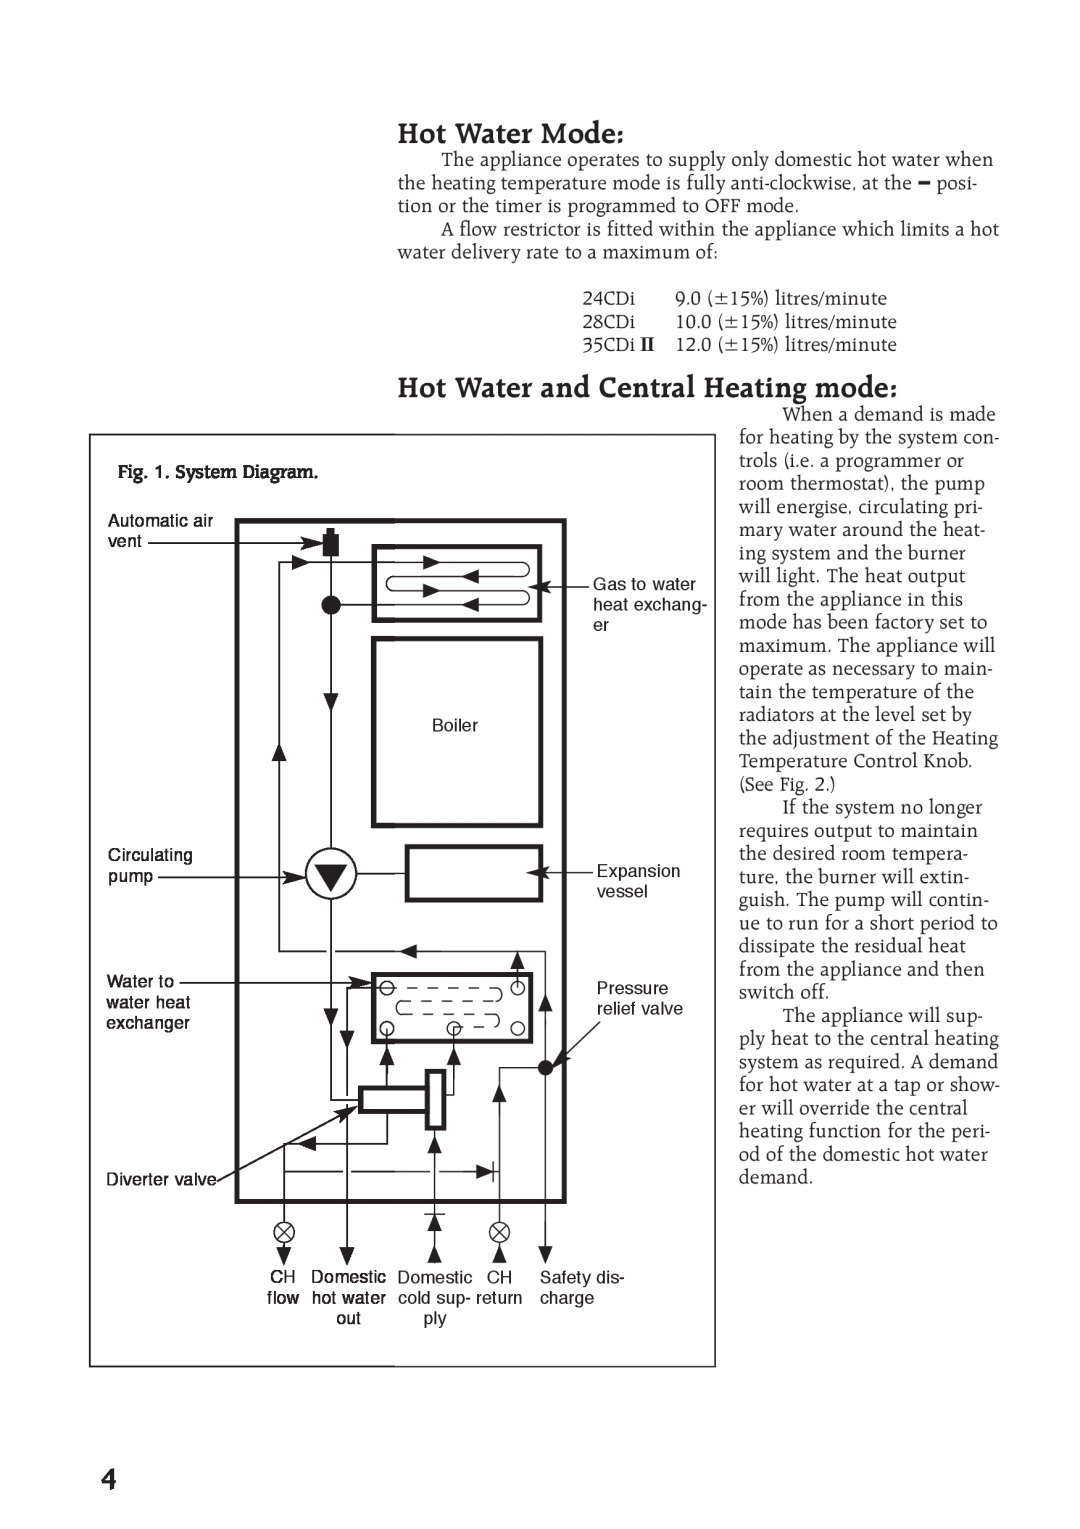 Bosch Appliances 28CDI, 35CDI II manual Hot Water Mode, Hot Water and Central Heating mode 